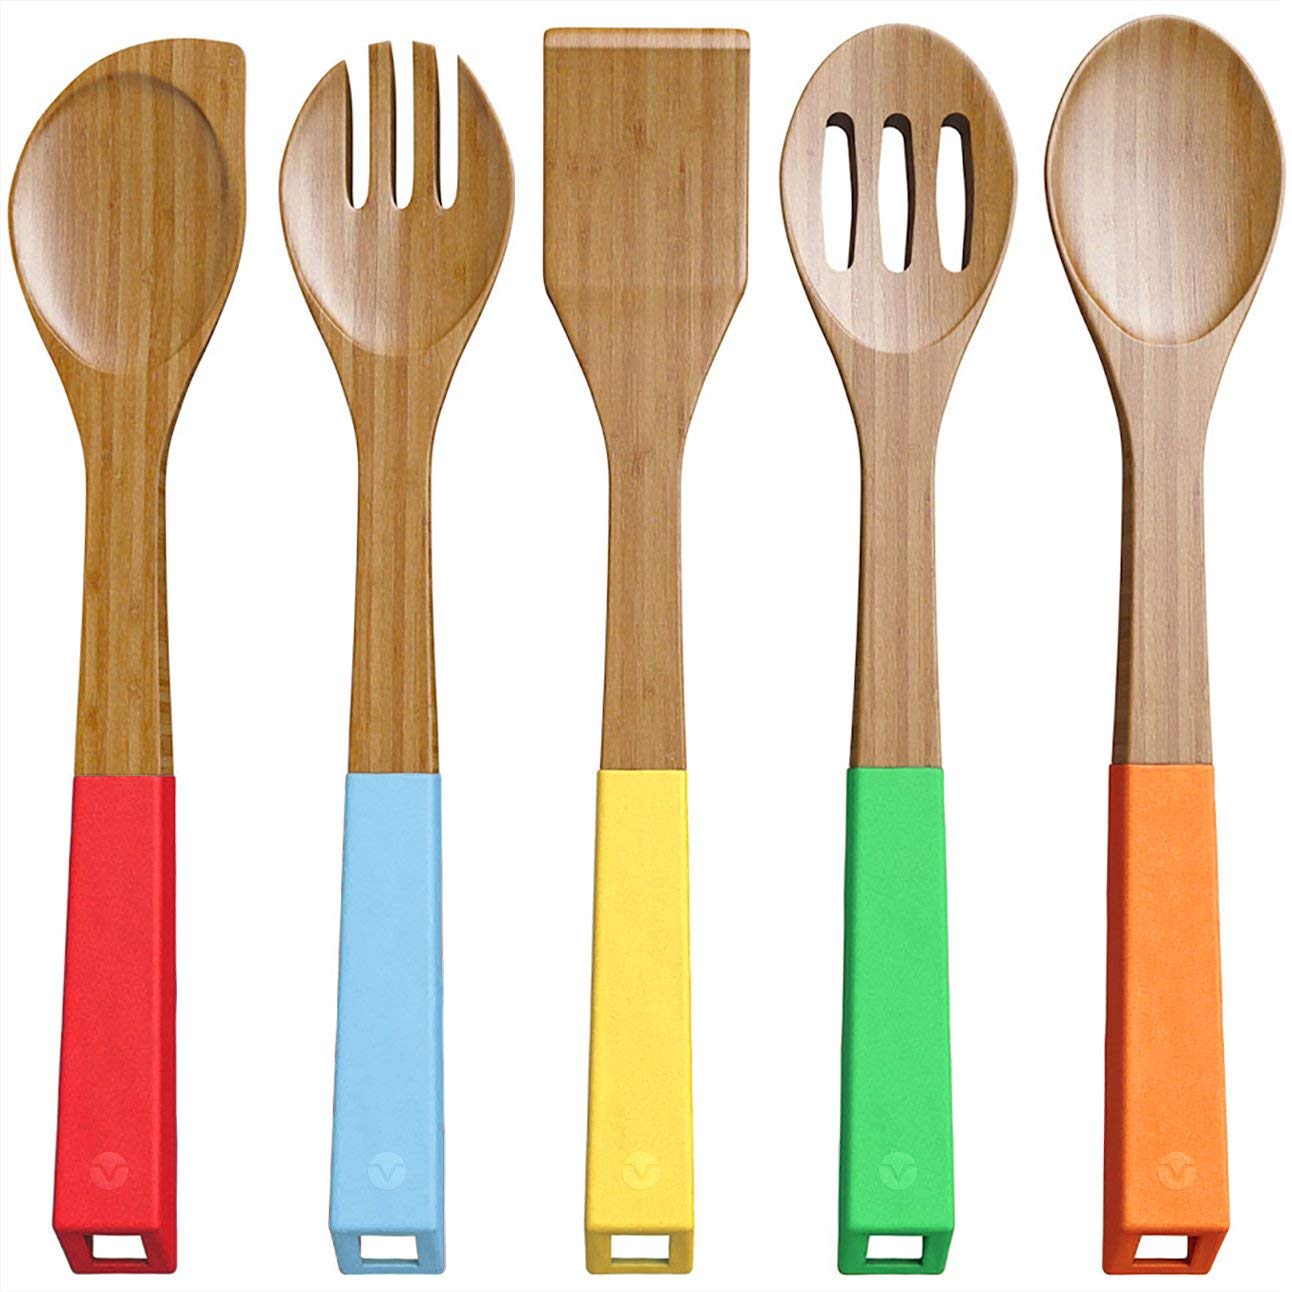 Top 9 Best Kitchen Utensil Sets In 2021 – Silicone and Stainless Steel ...